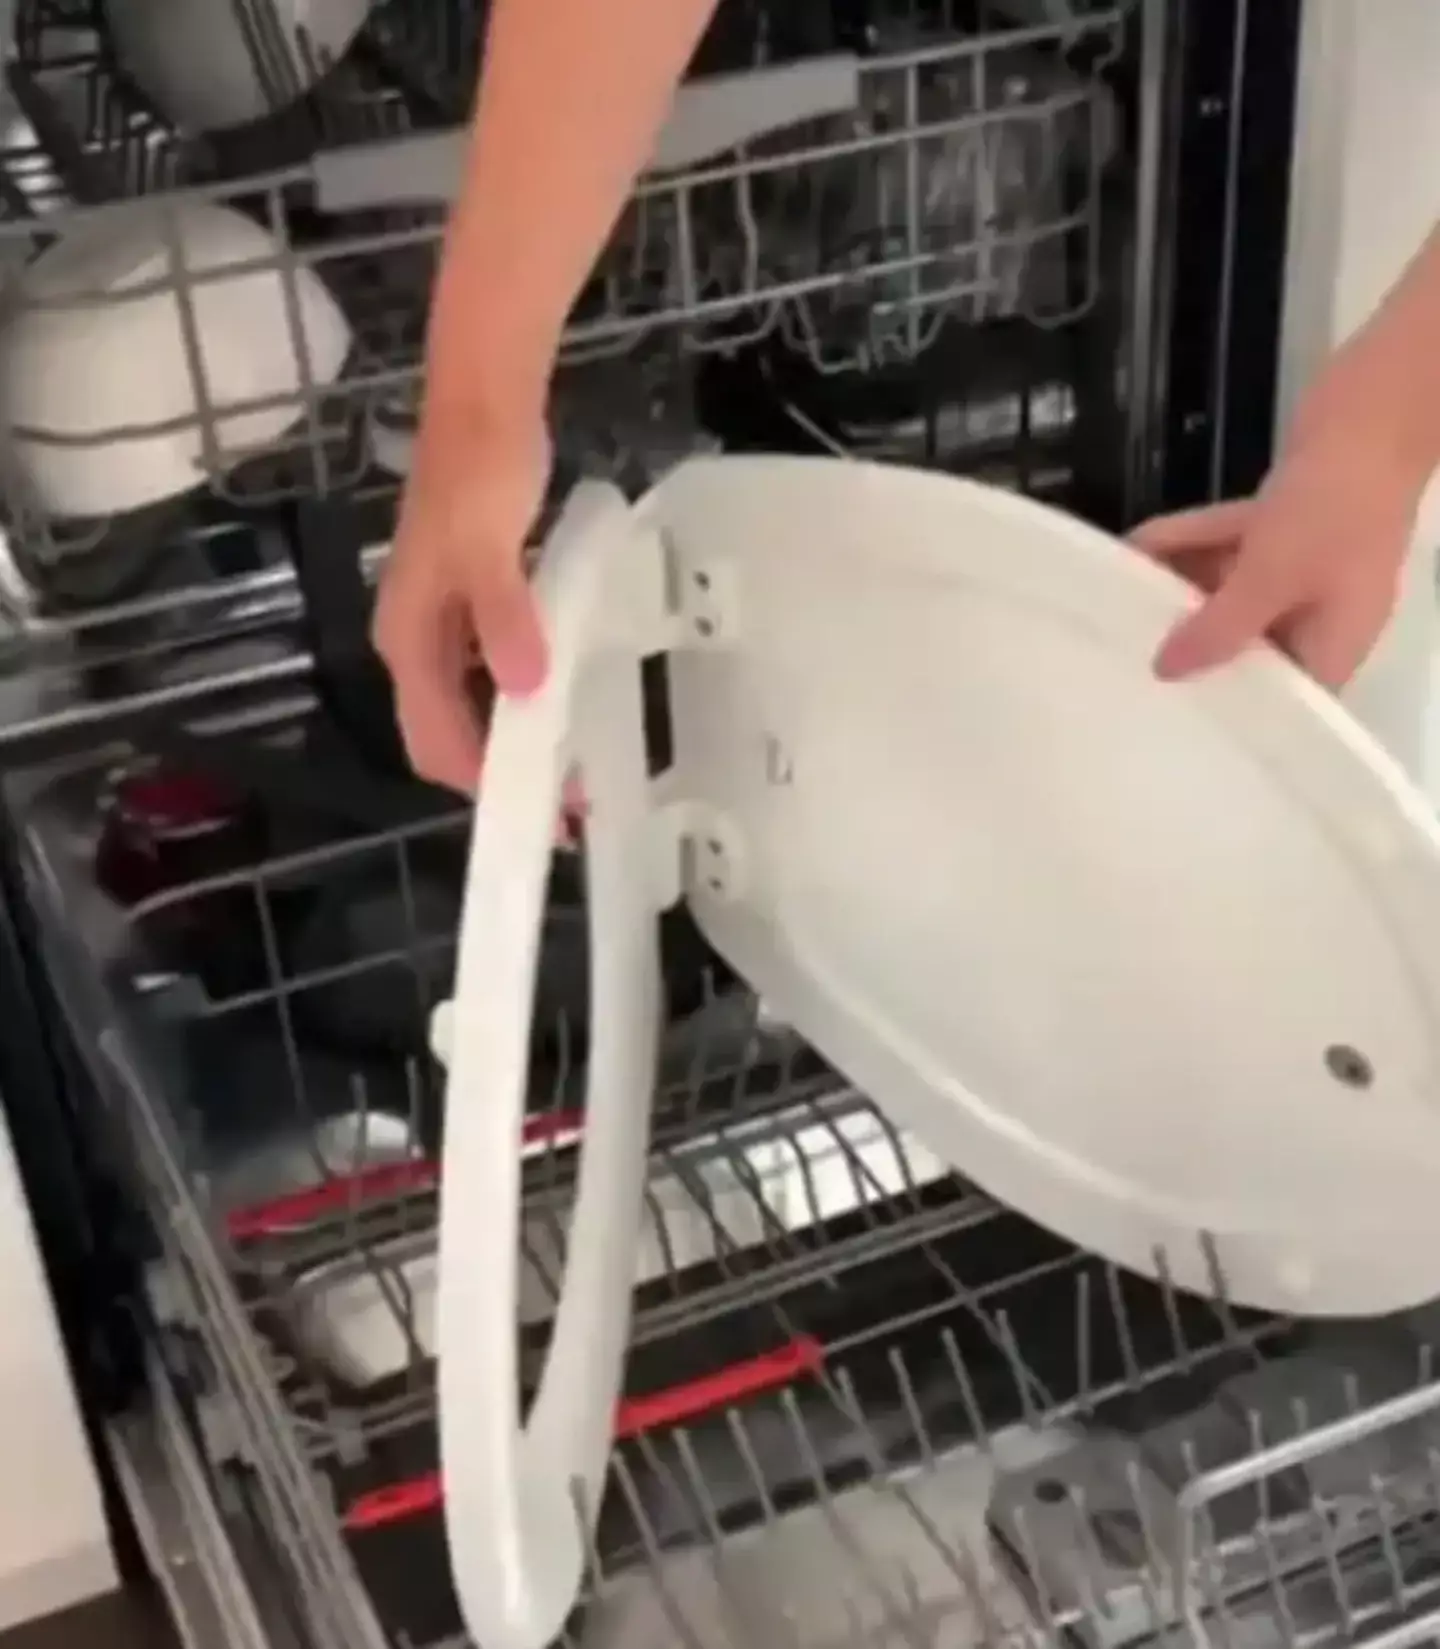 Some TikTok users were less than impressed by the toilet seat 'hack'.